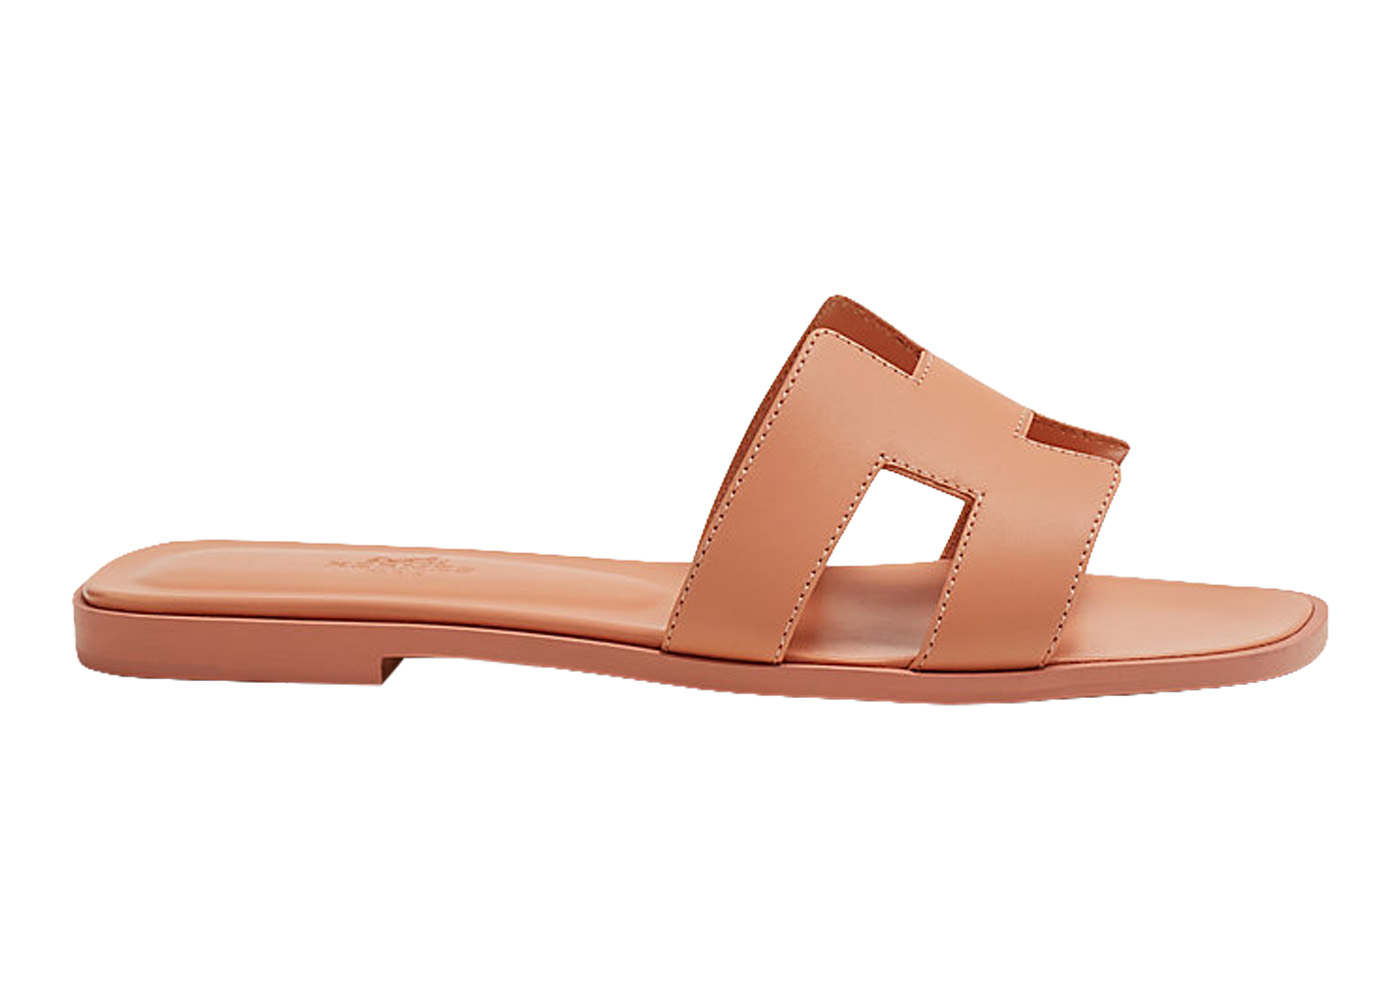 Buy Hermes Slides & Sandals Shoes & New Sneakers - StockX